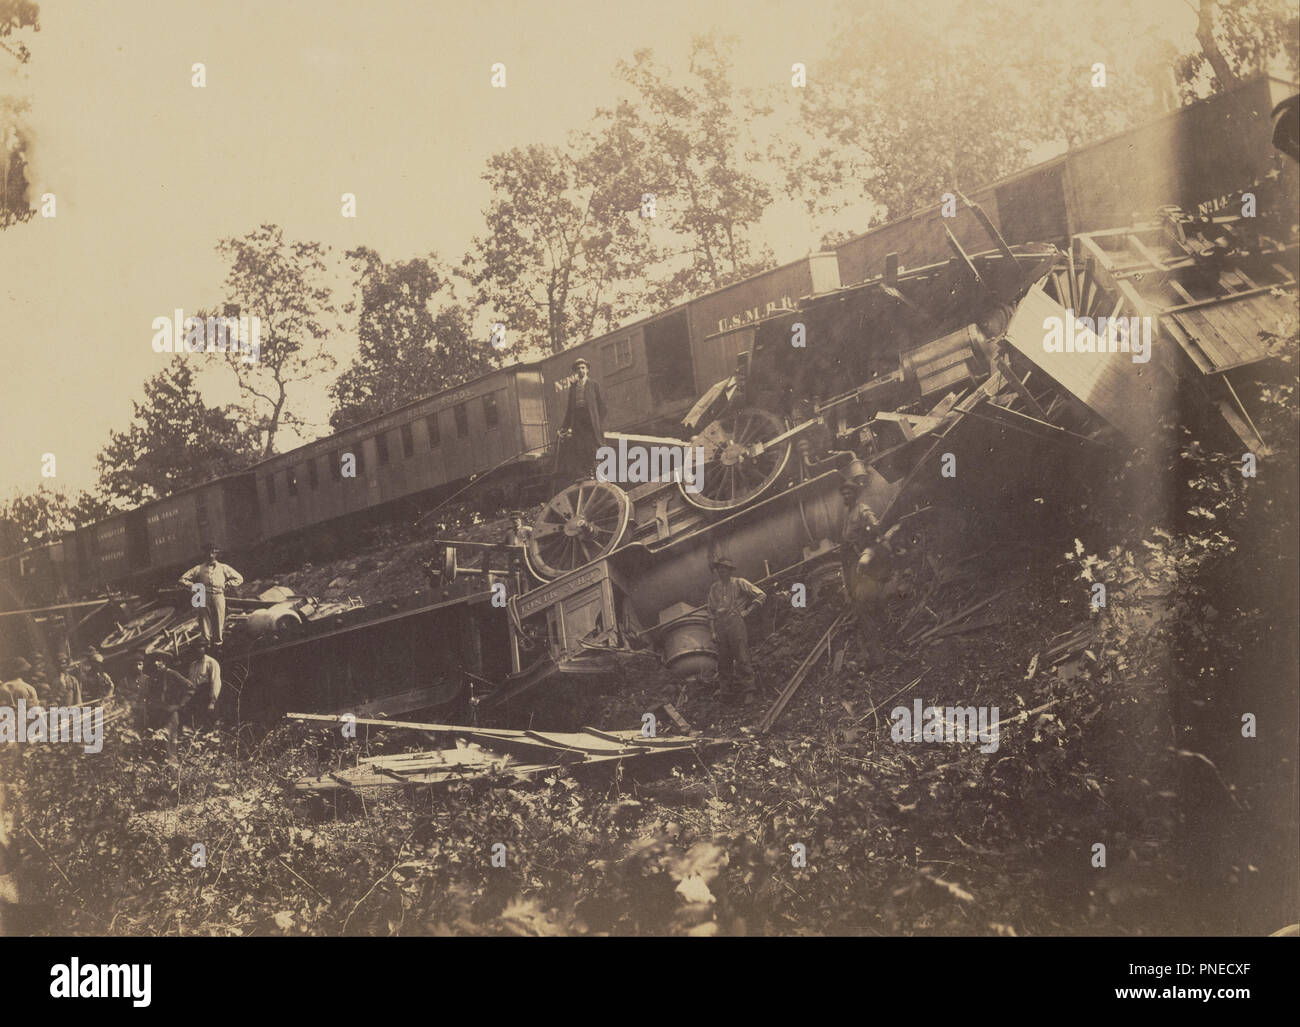 Railroad Accident Caused by Rebels. Date/Period: 1862. Print. Albumen silver. Height: 235 mm (9.25 in); Width: 325 mm (12.79 in). Author: ANDREW J. RUSSELL. Stock Photo